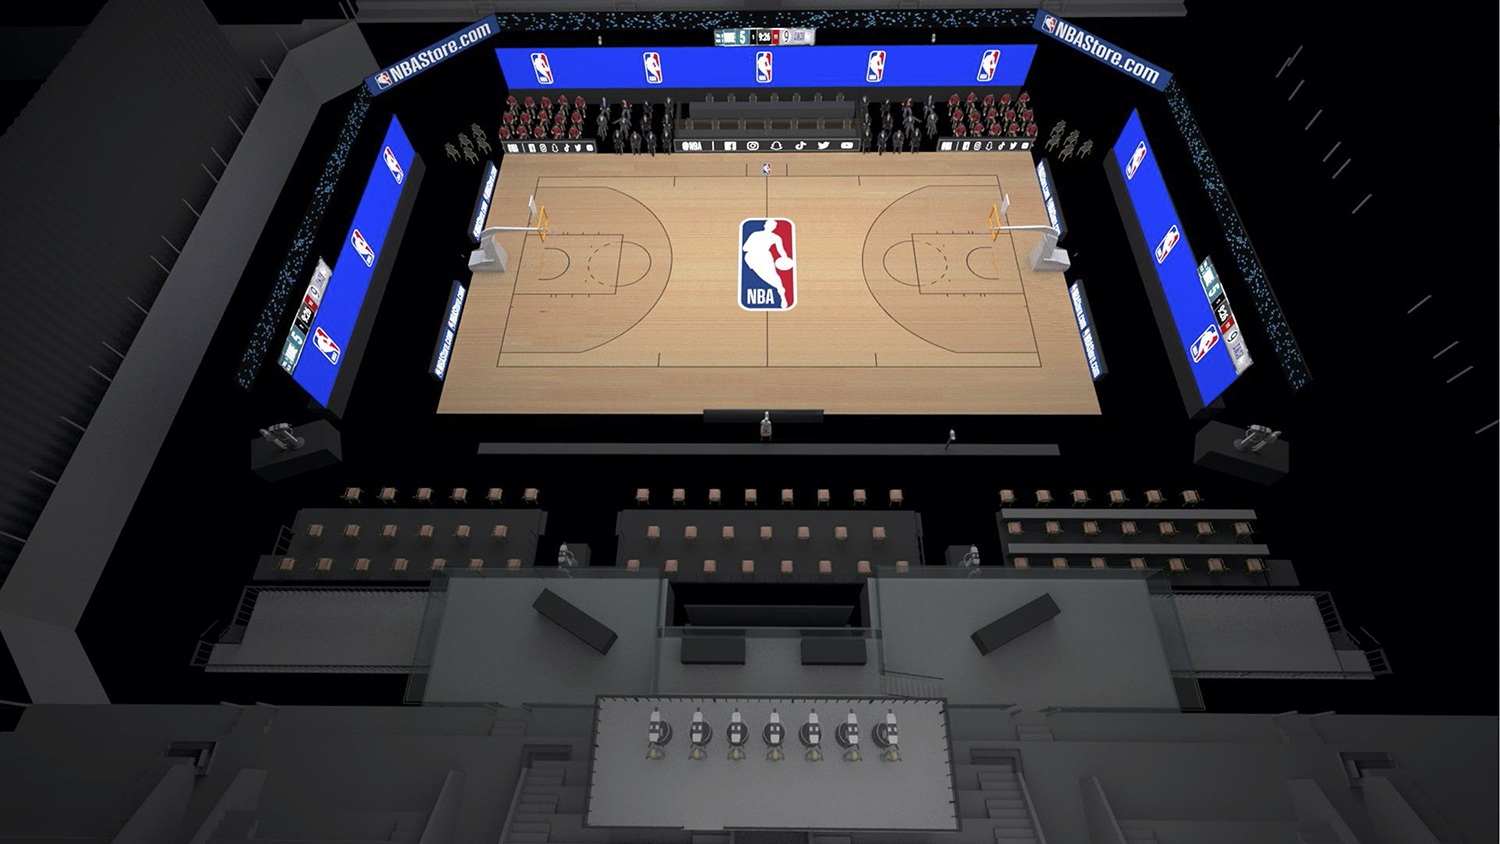 Nba Returns Espn Turner Nba Team Up For Sprawling Covid Safe Production At Wide World Of Sports